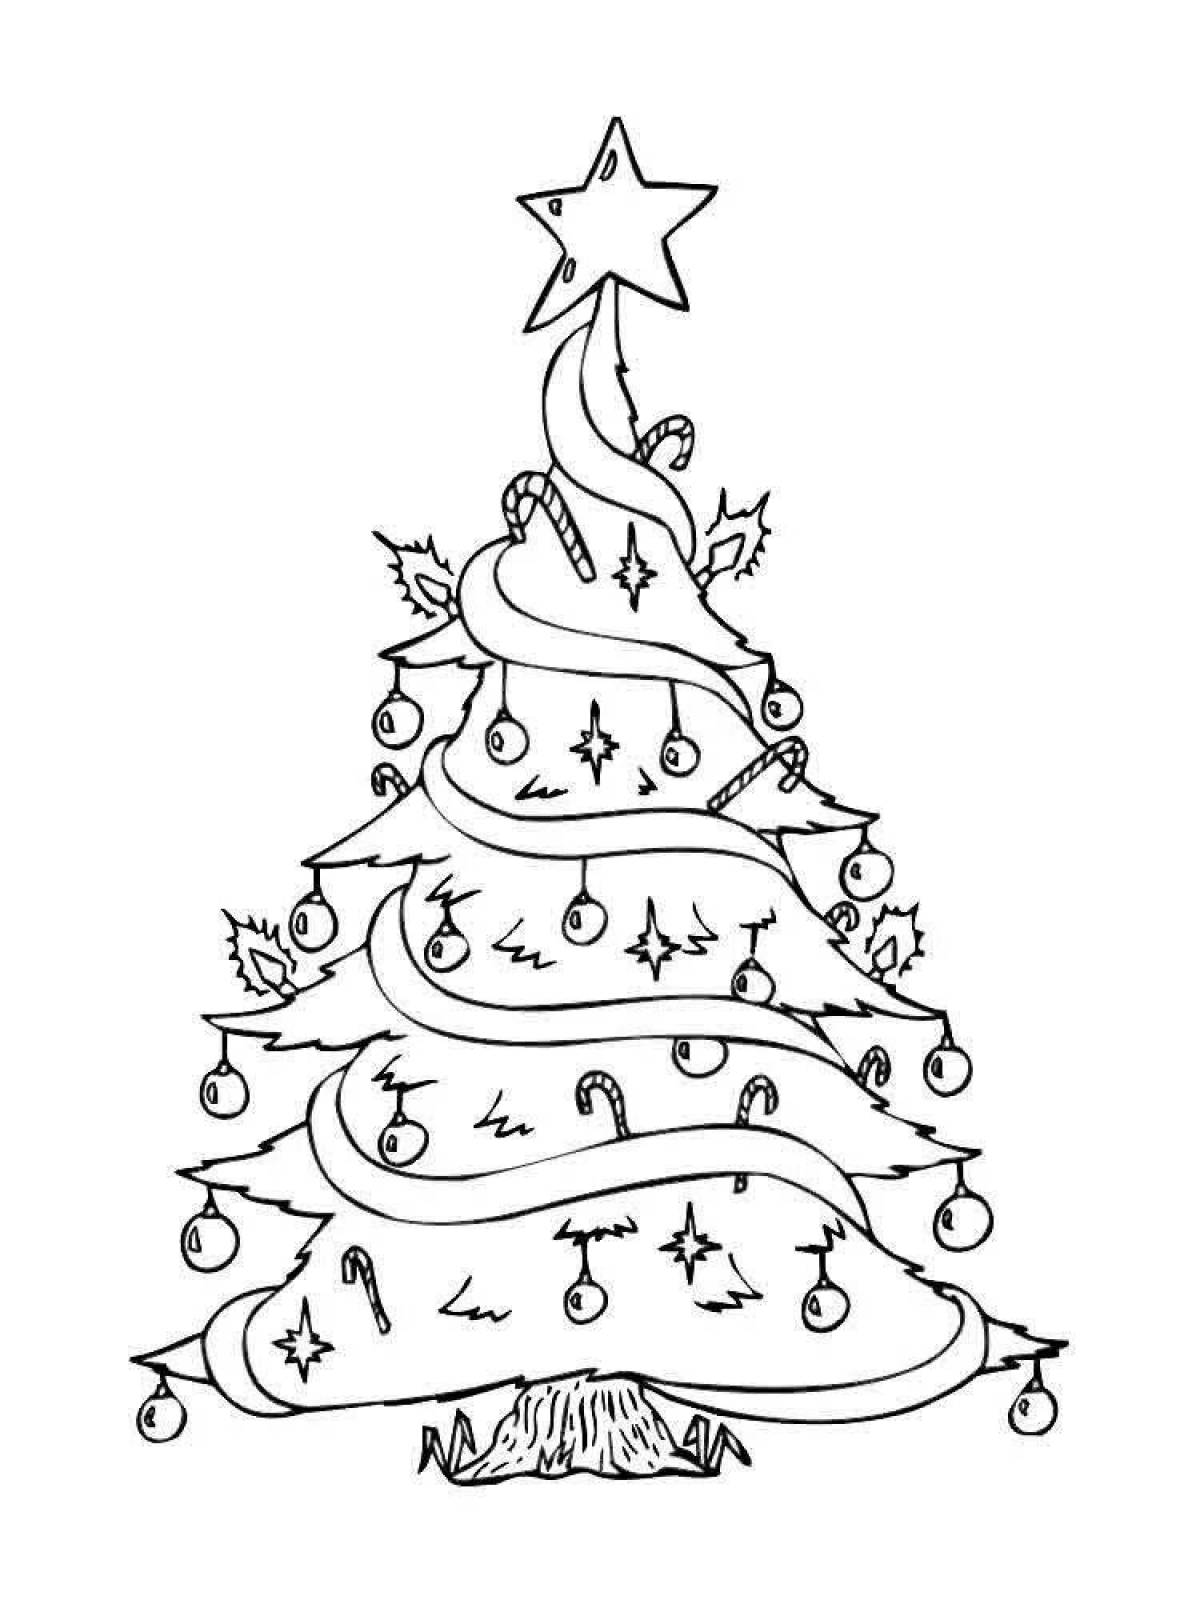 Exciting Christmas tree coloring book